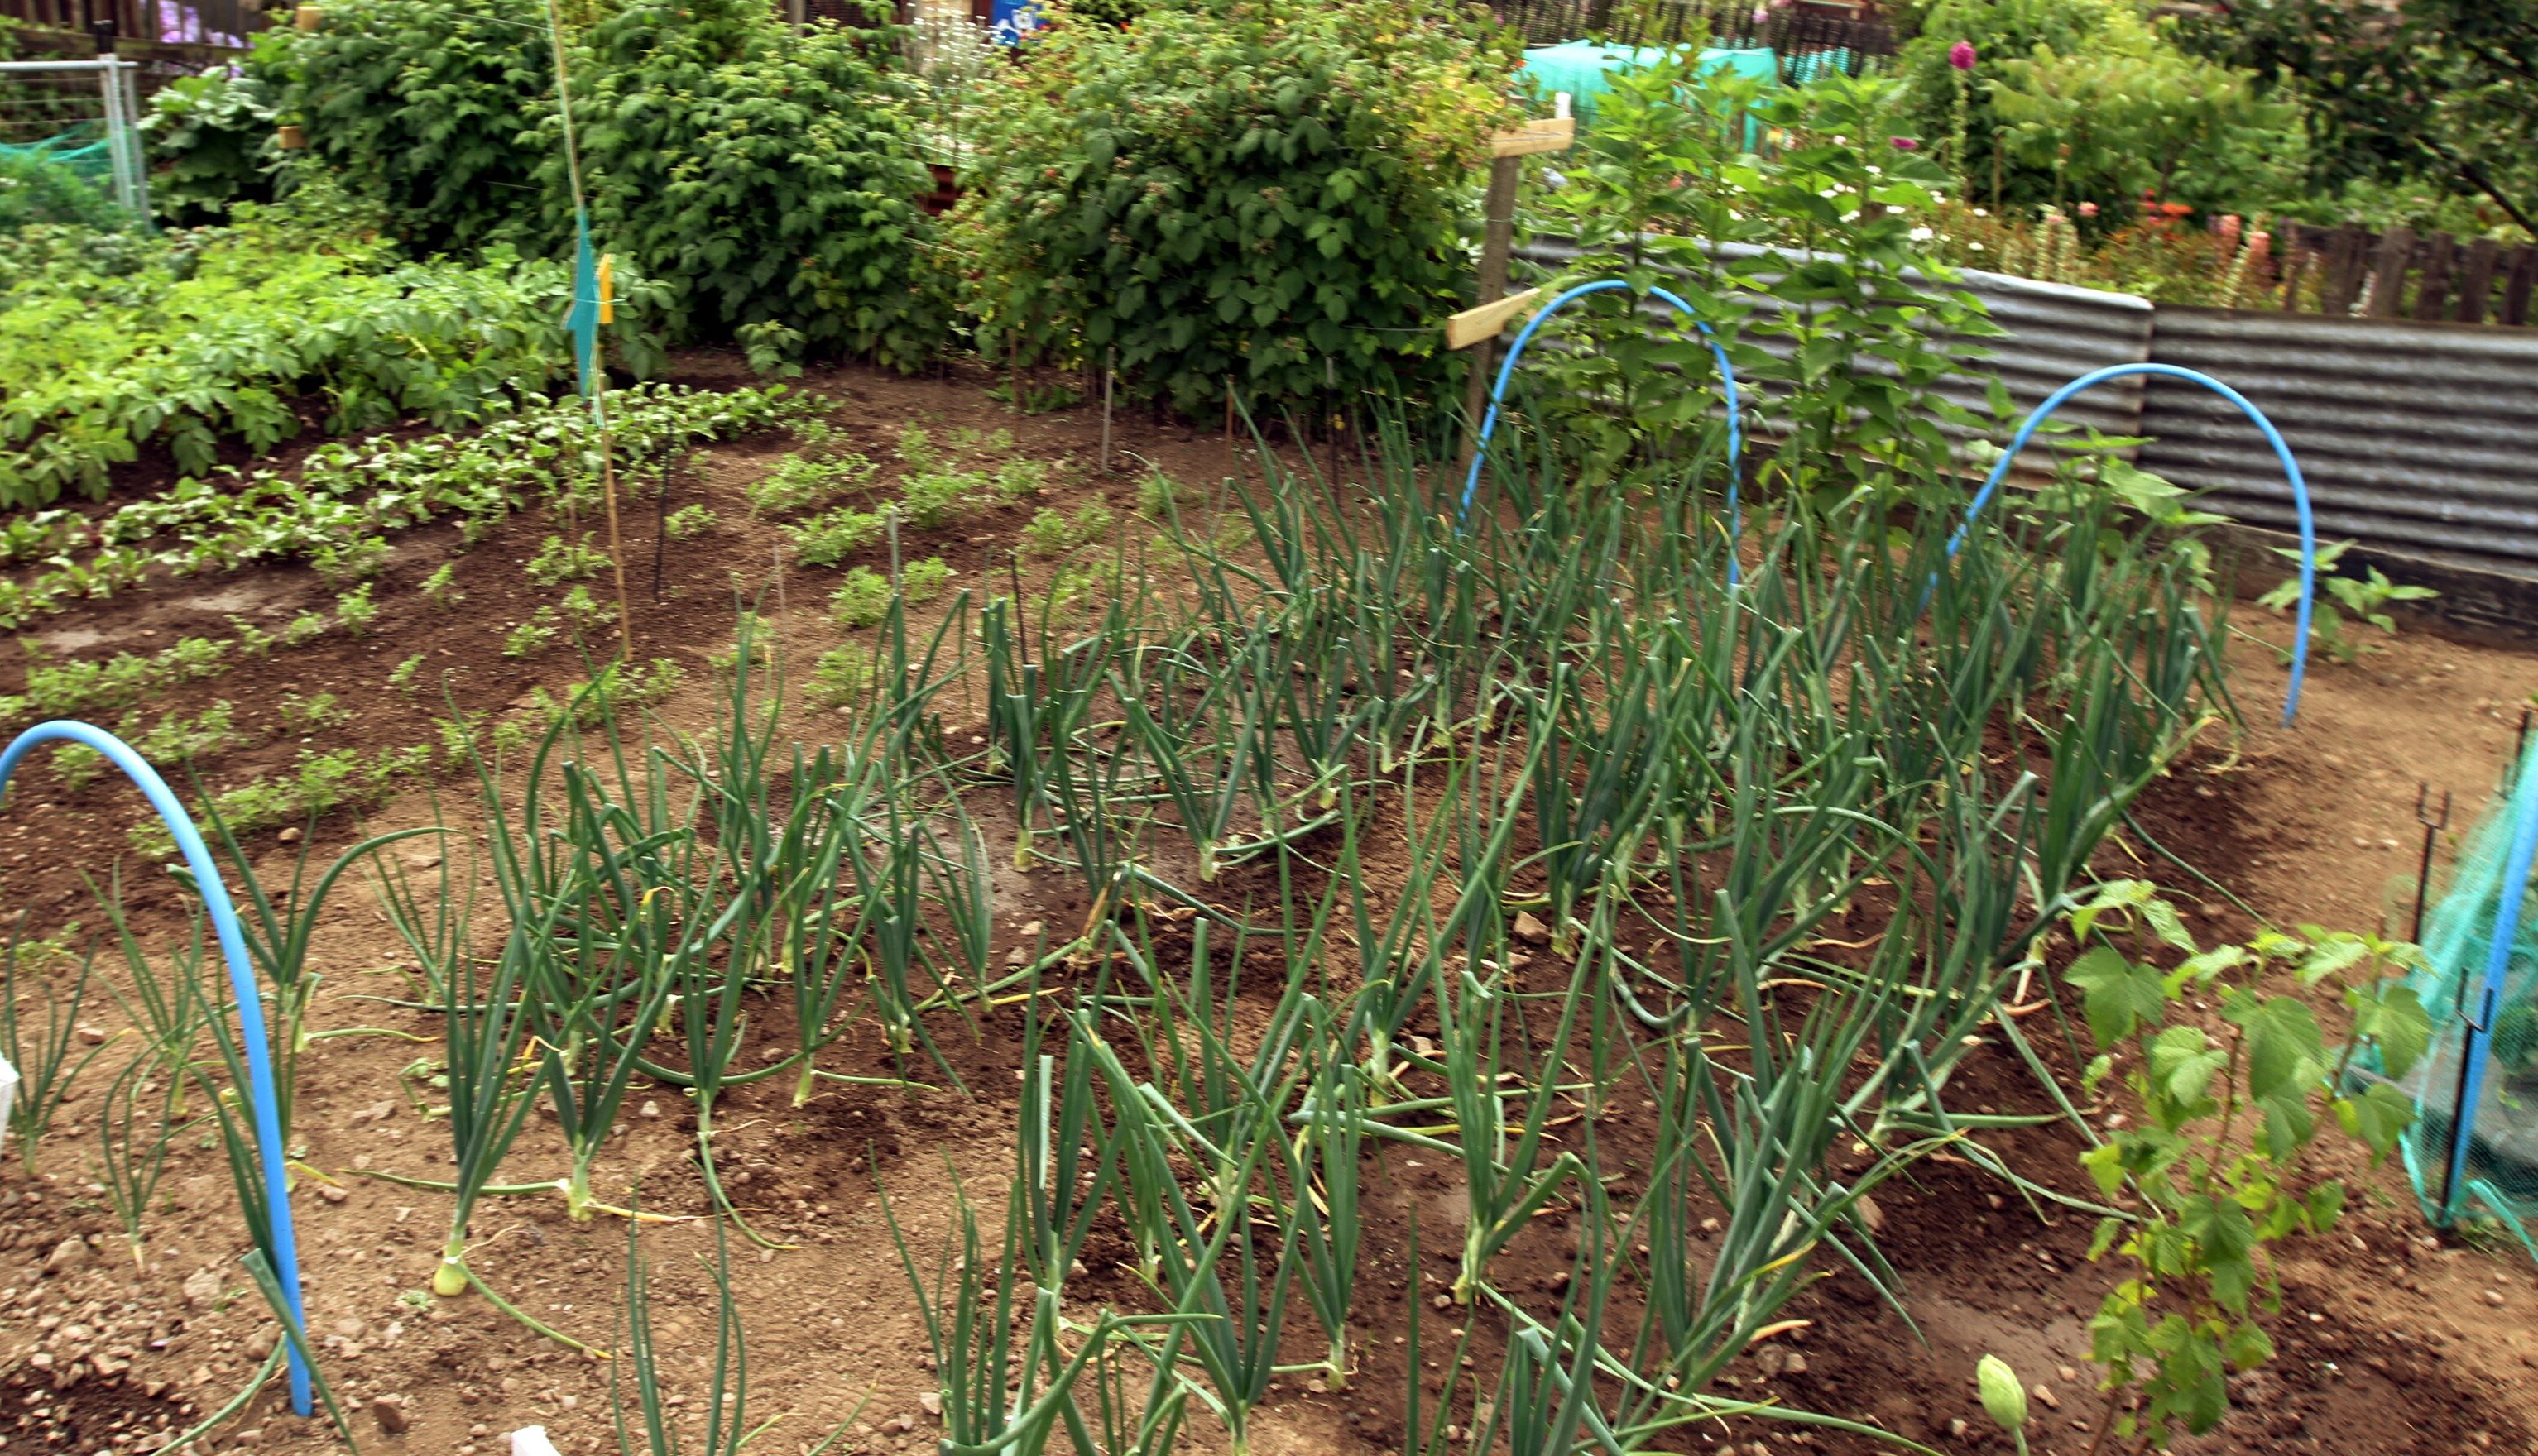 Seeds have been sowed for new allotments in Inverkeithing.